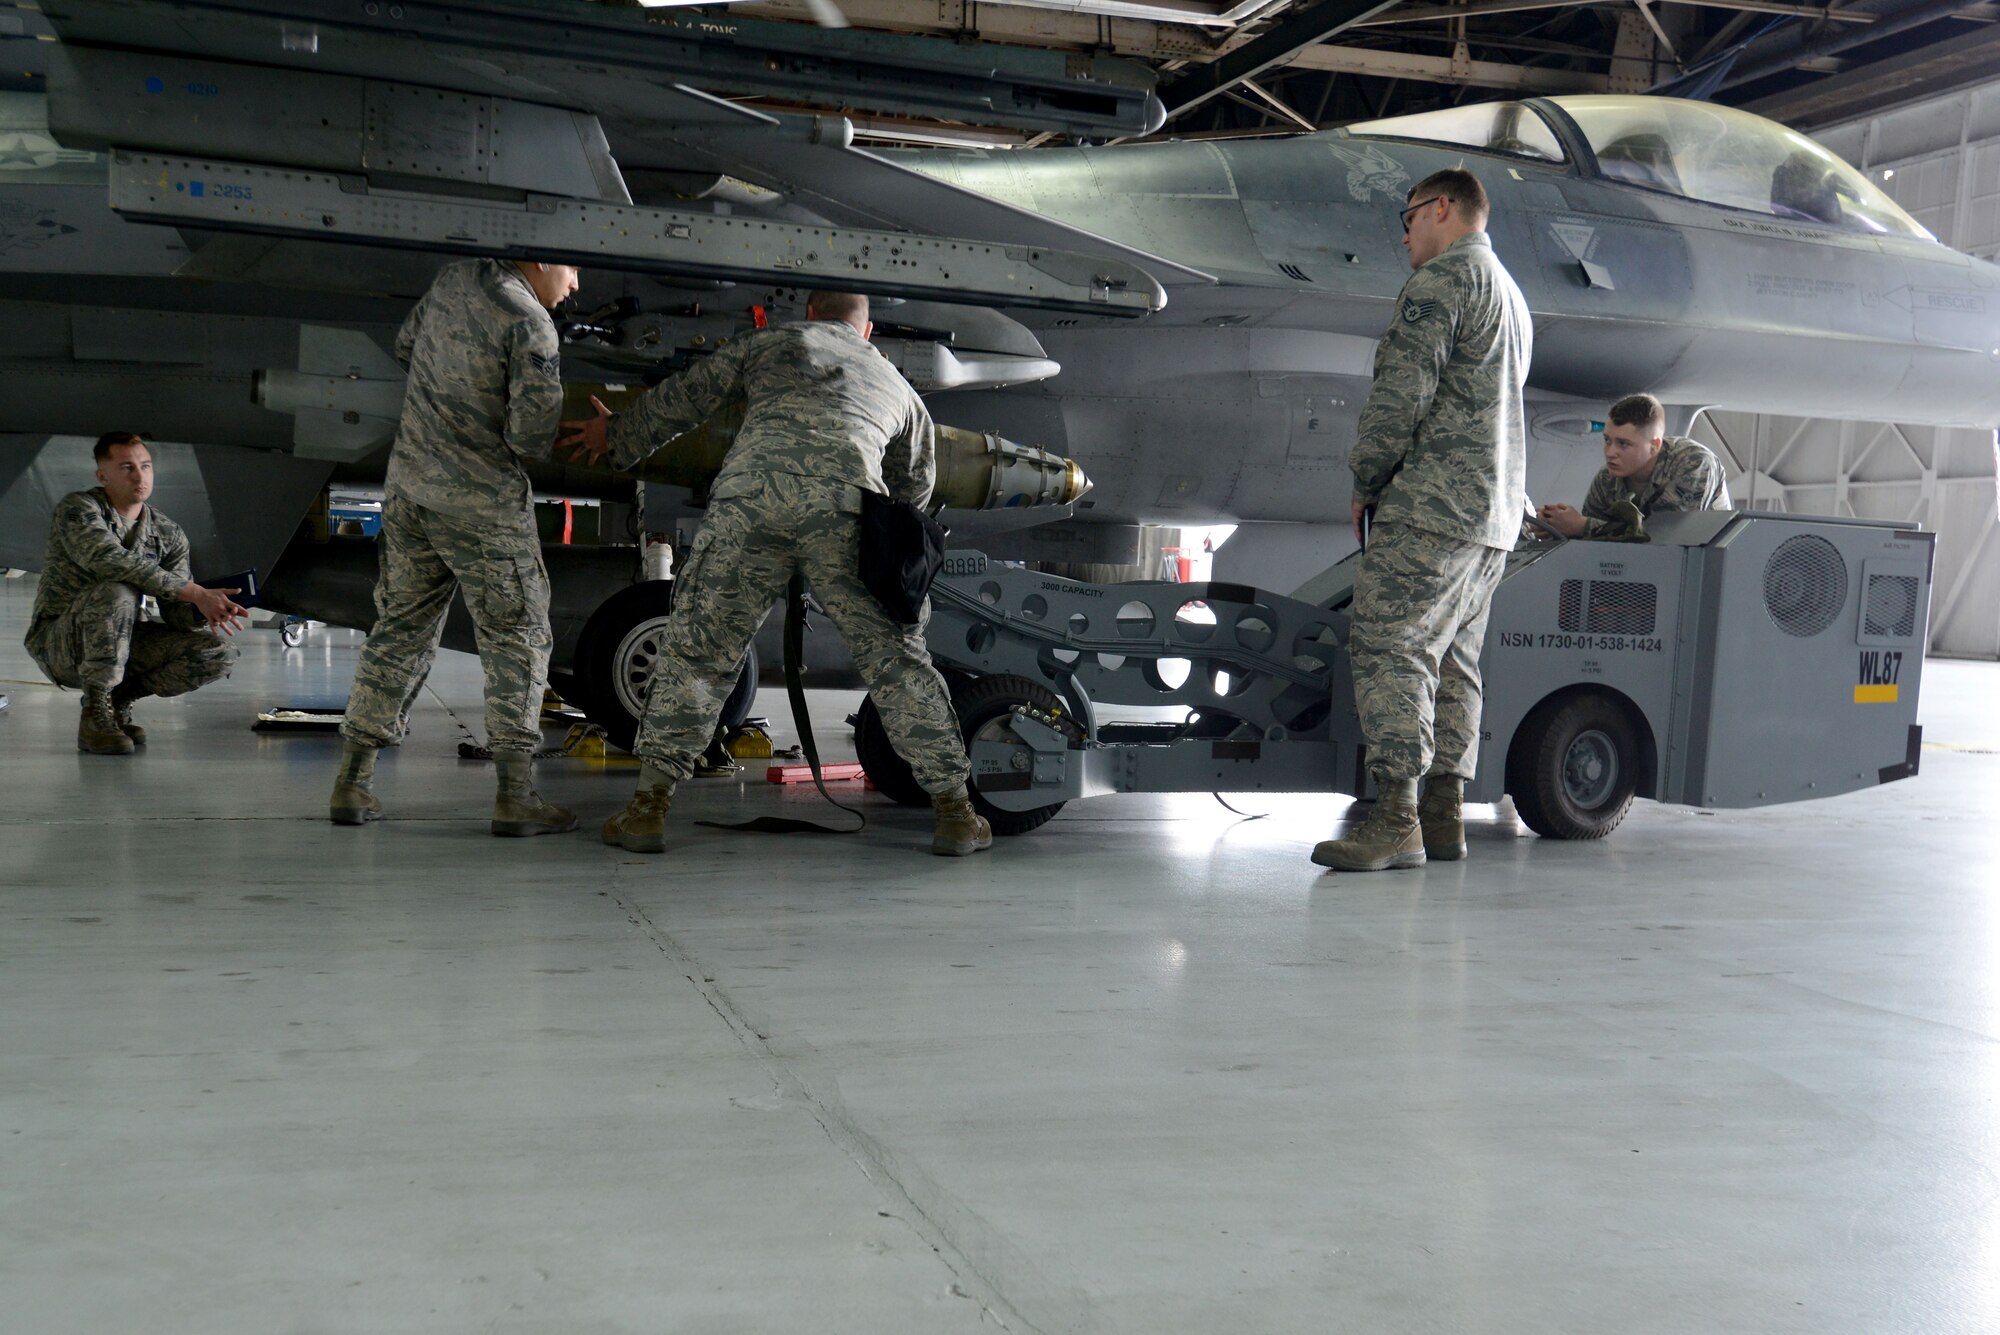 U.S. Airmen assigned to the 20th Aircraft Maintenance Squadron, 55th Maintenance Unit, load a GBU-38 Joint Direct Attack Munition during the Load Crew of the Quarter competition at Shaw Air Force Base, S.C., Jan. 12, 2018.